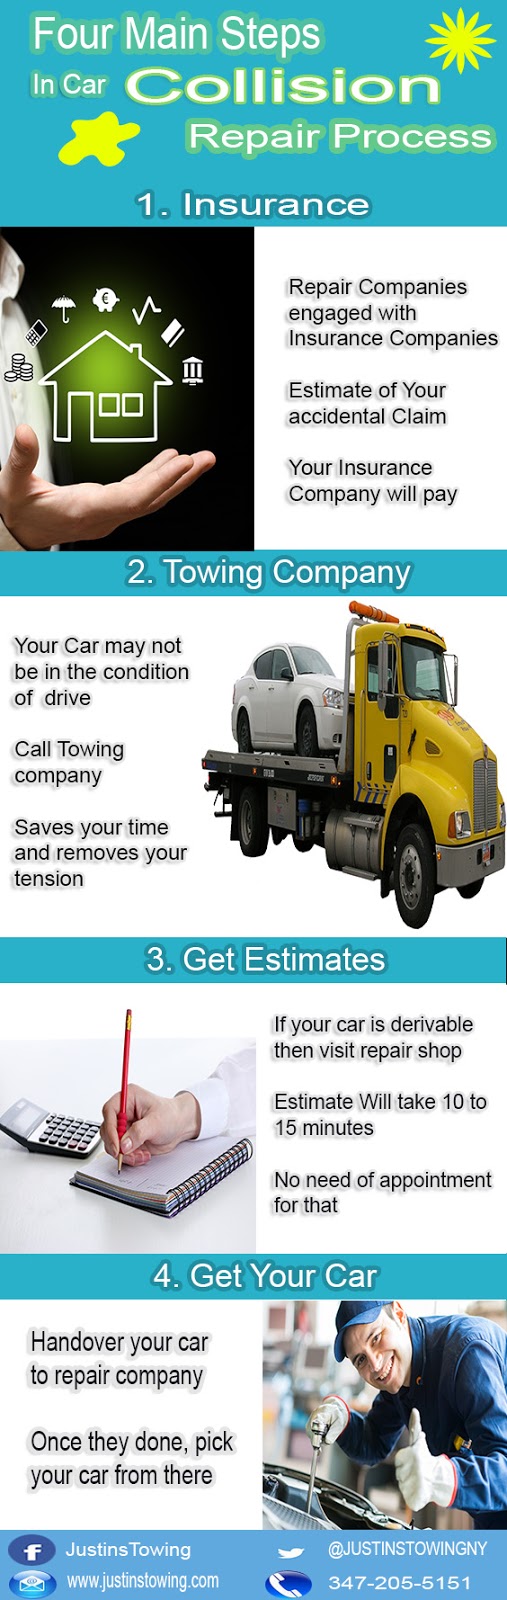 http://visual.ly/four-main-steps-car-collision-process